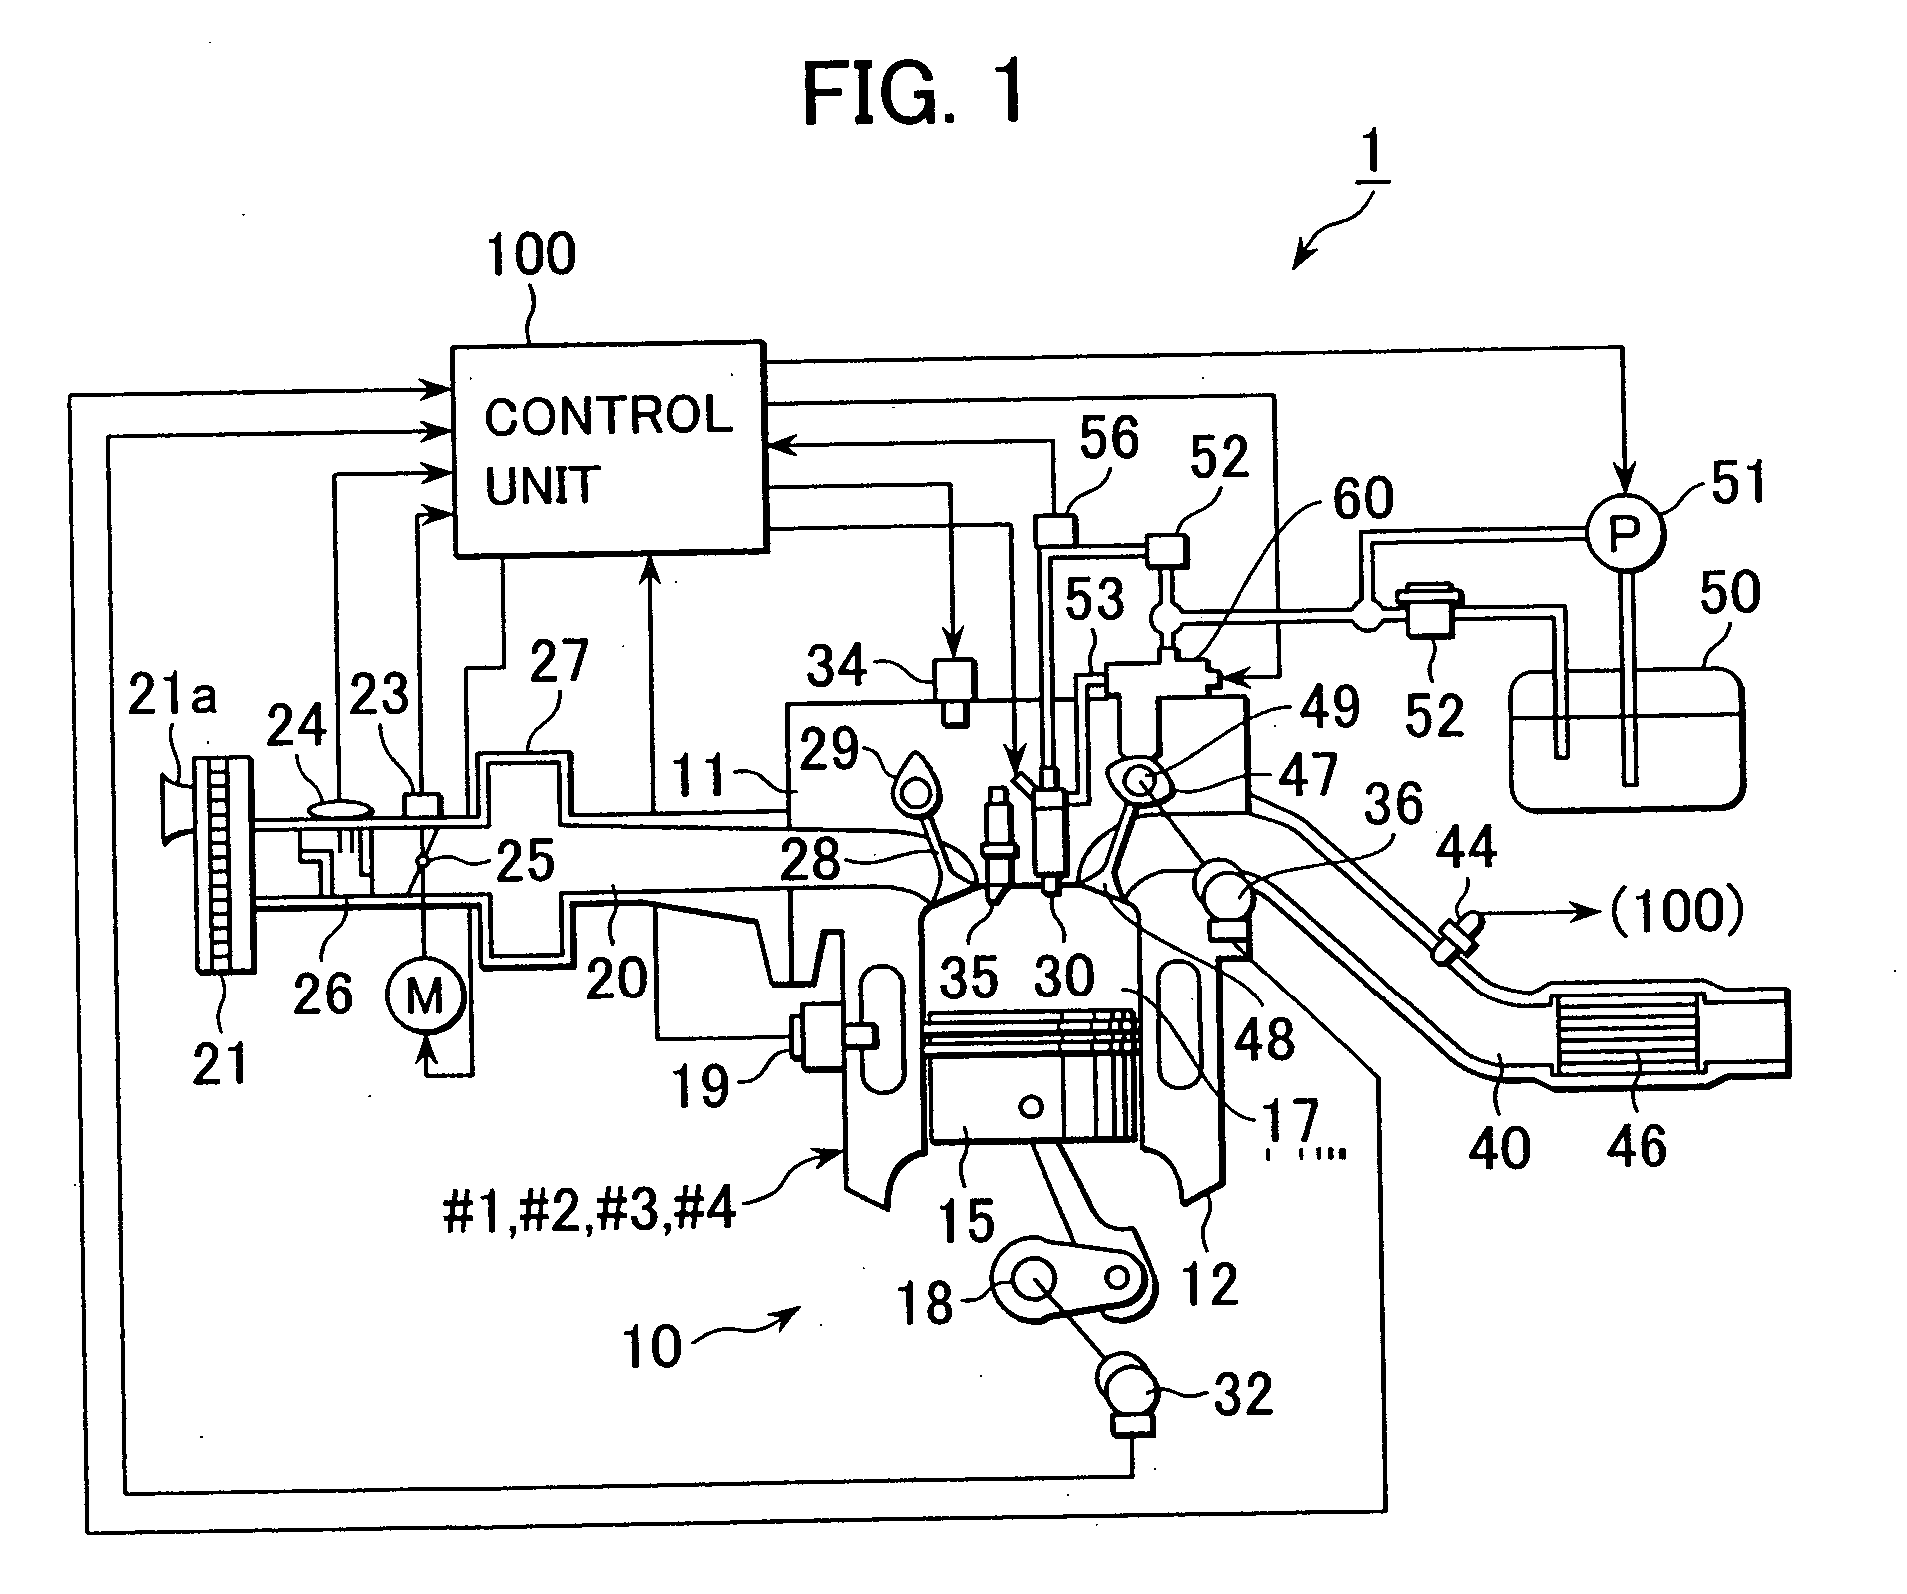 High-pressure fuel pump control device for engine